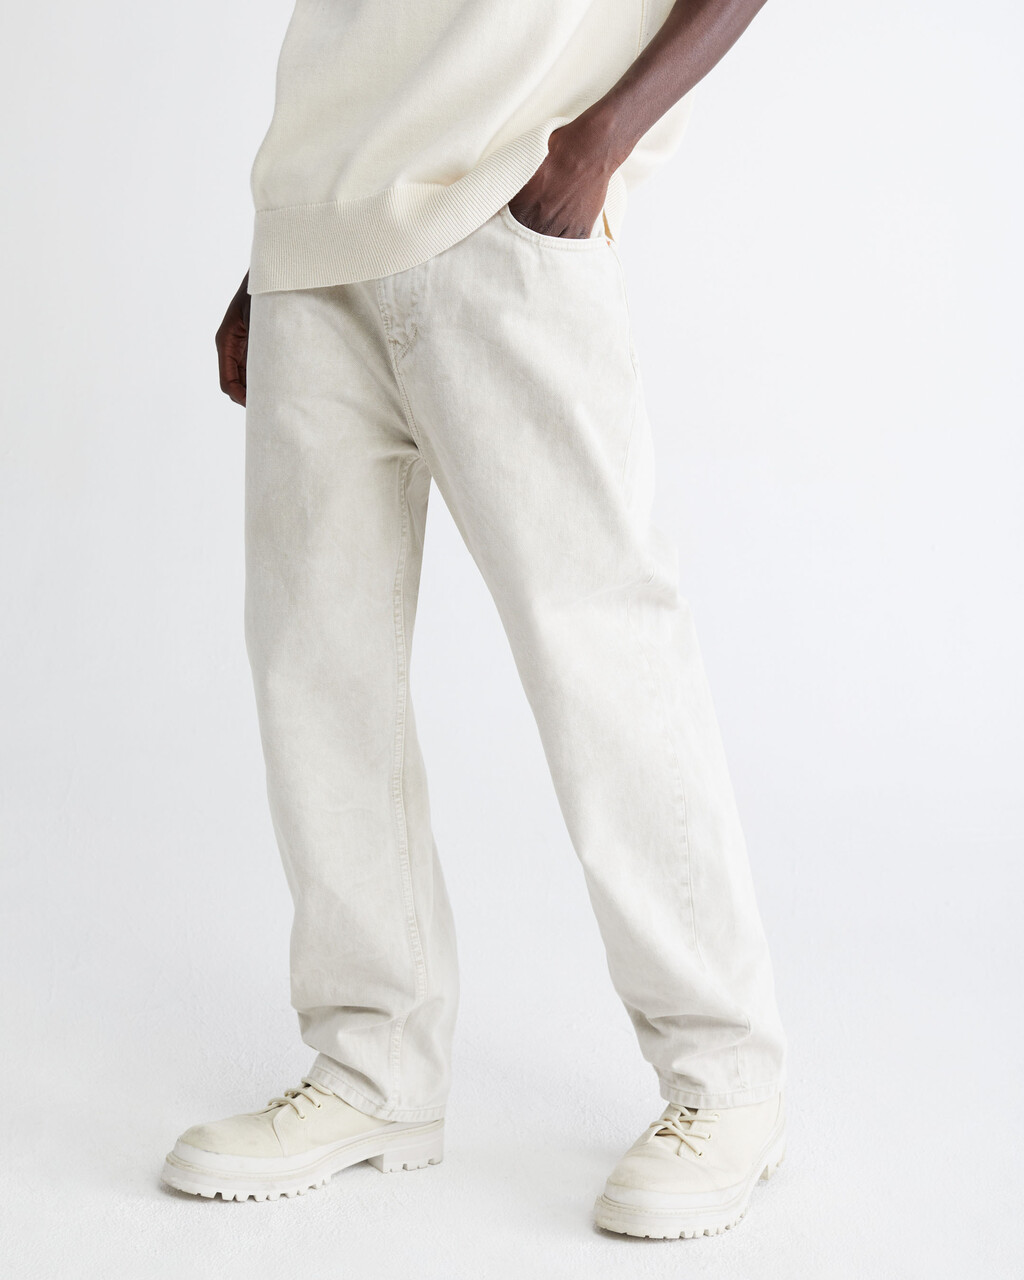 STANDARDS TWIST RELAXED JEANS, MARBLE UNBLEACHED, hi-res